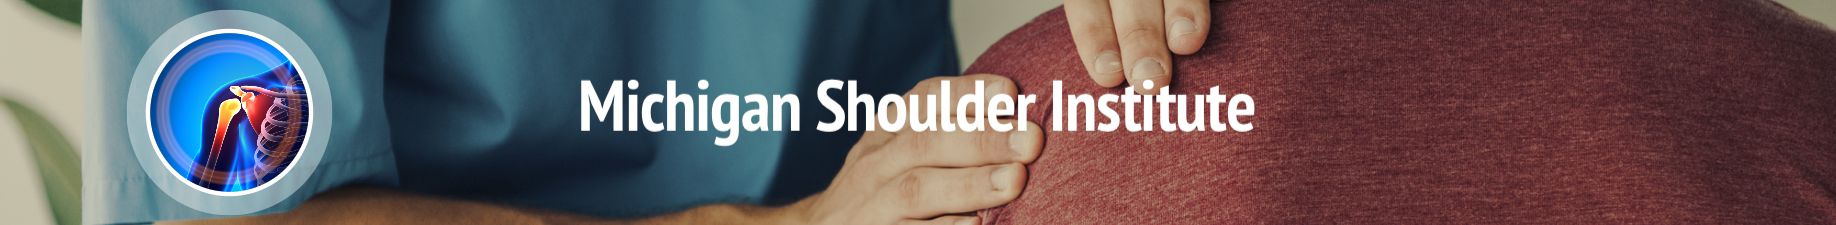 For all of your shoulder treatment needs in the Muskegon & Grand Haven, MI areas be sure to contact the experts at Orthopaedic Associates of Muskegon!